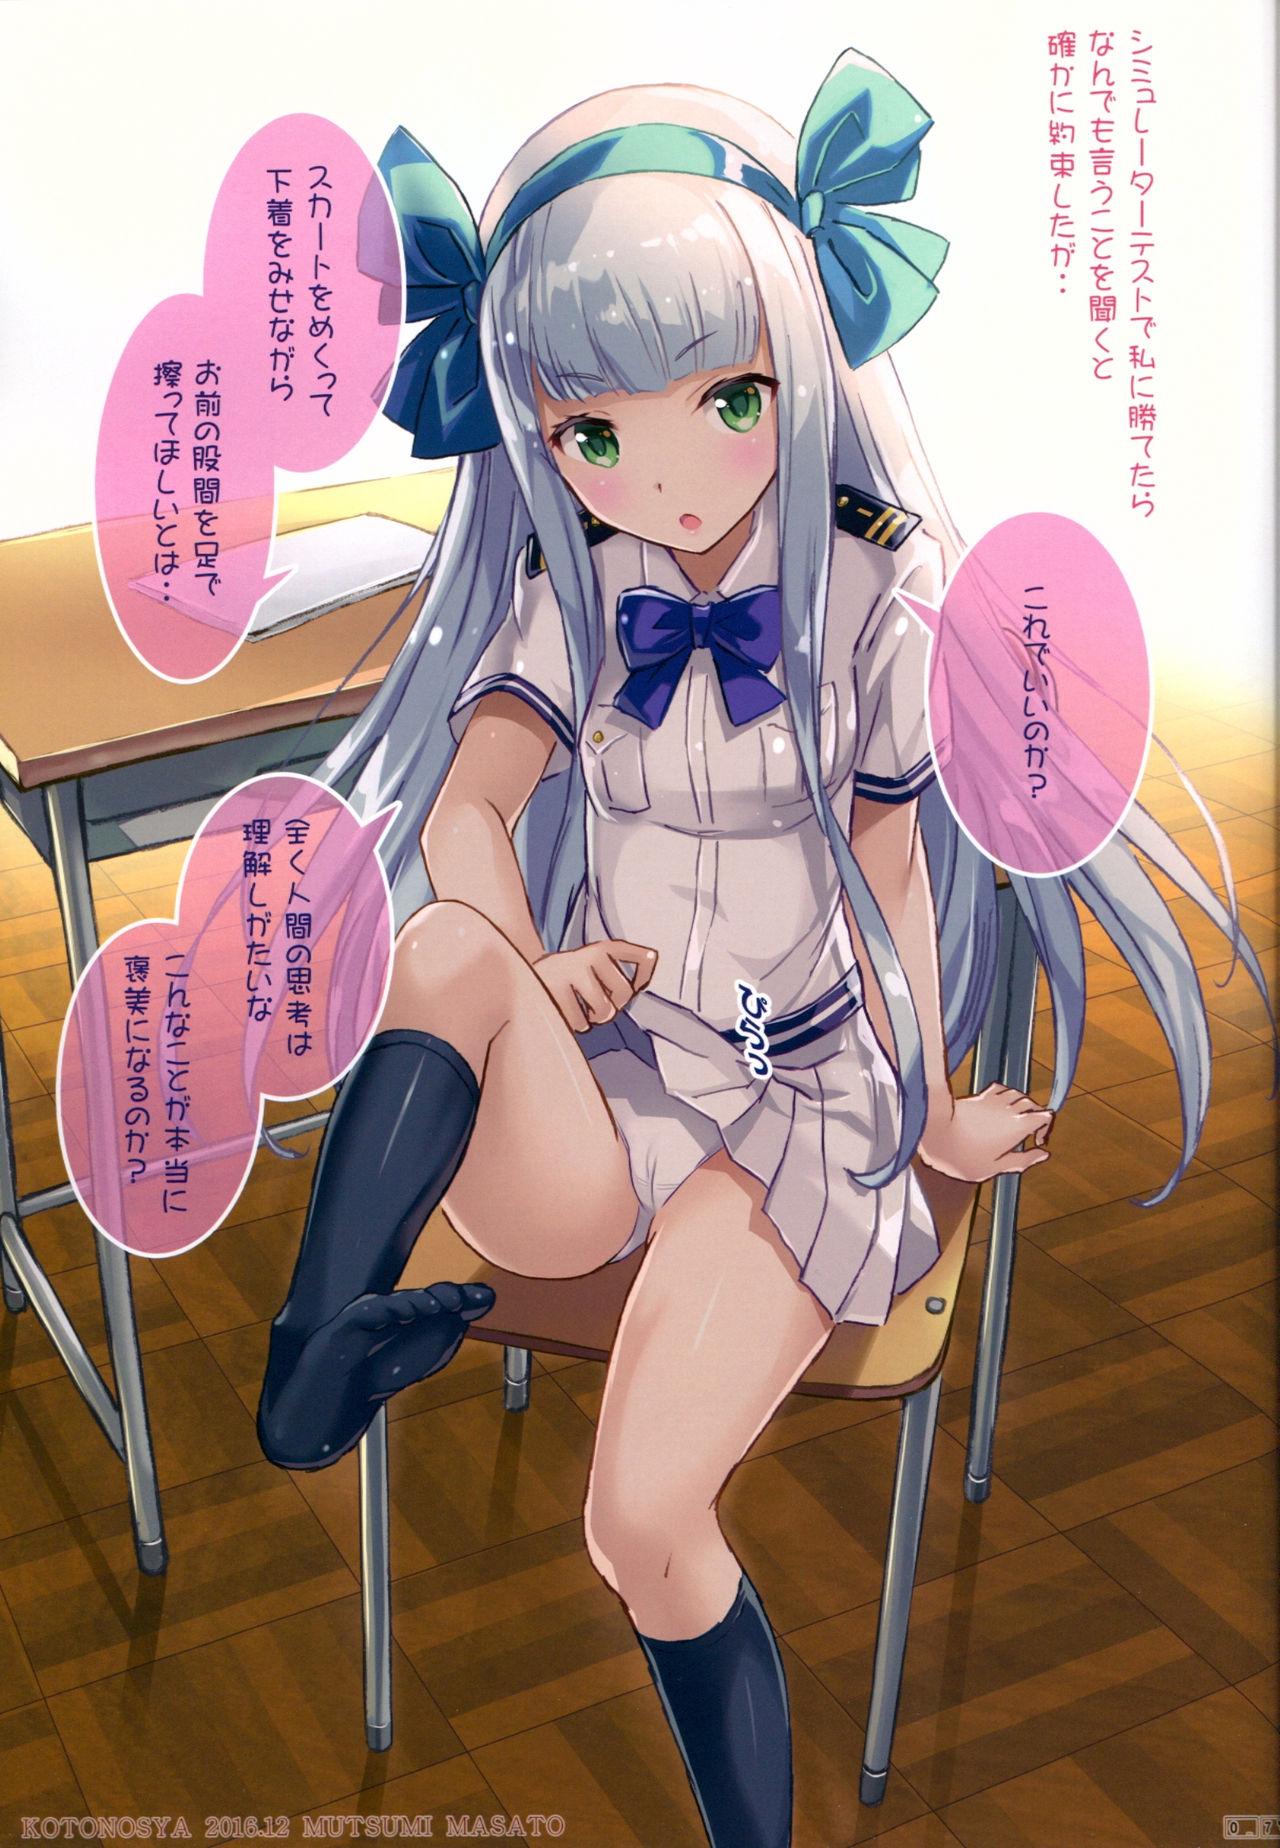 Couple TAKAO OF BLUE STEEL 06 - Arpeggio of blue steel Sesso - Page 6